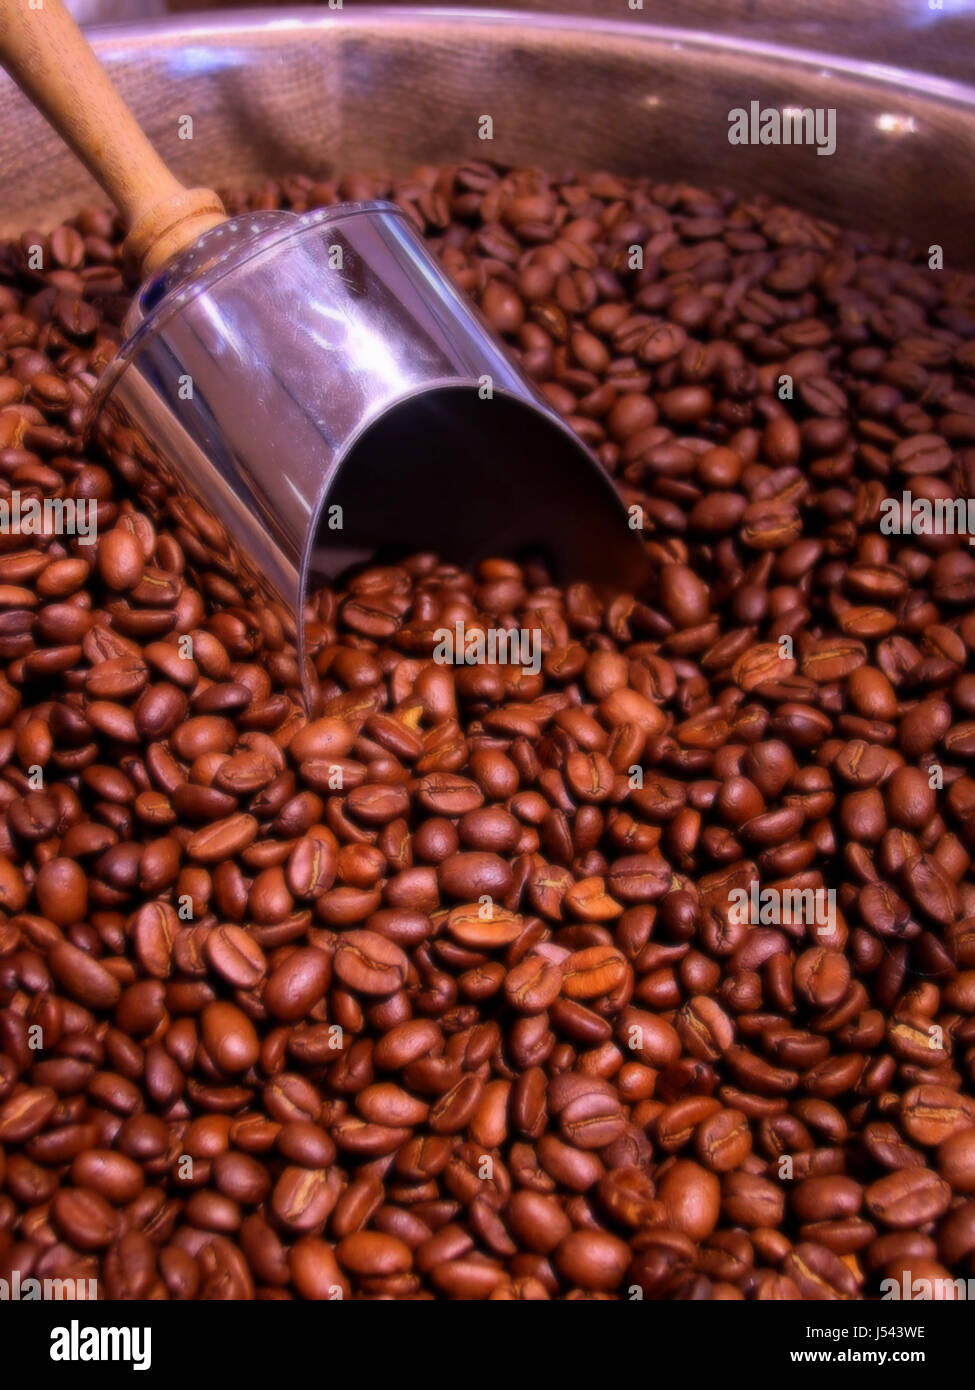 cafe brown brownish brunette flavour container shovel coffee coffee bean coffee Stock Photo